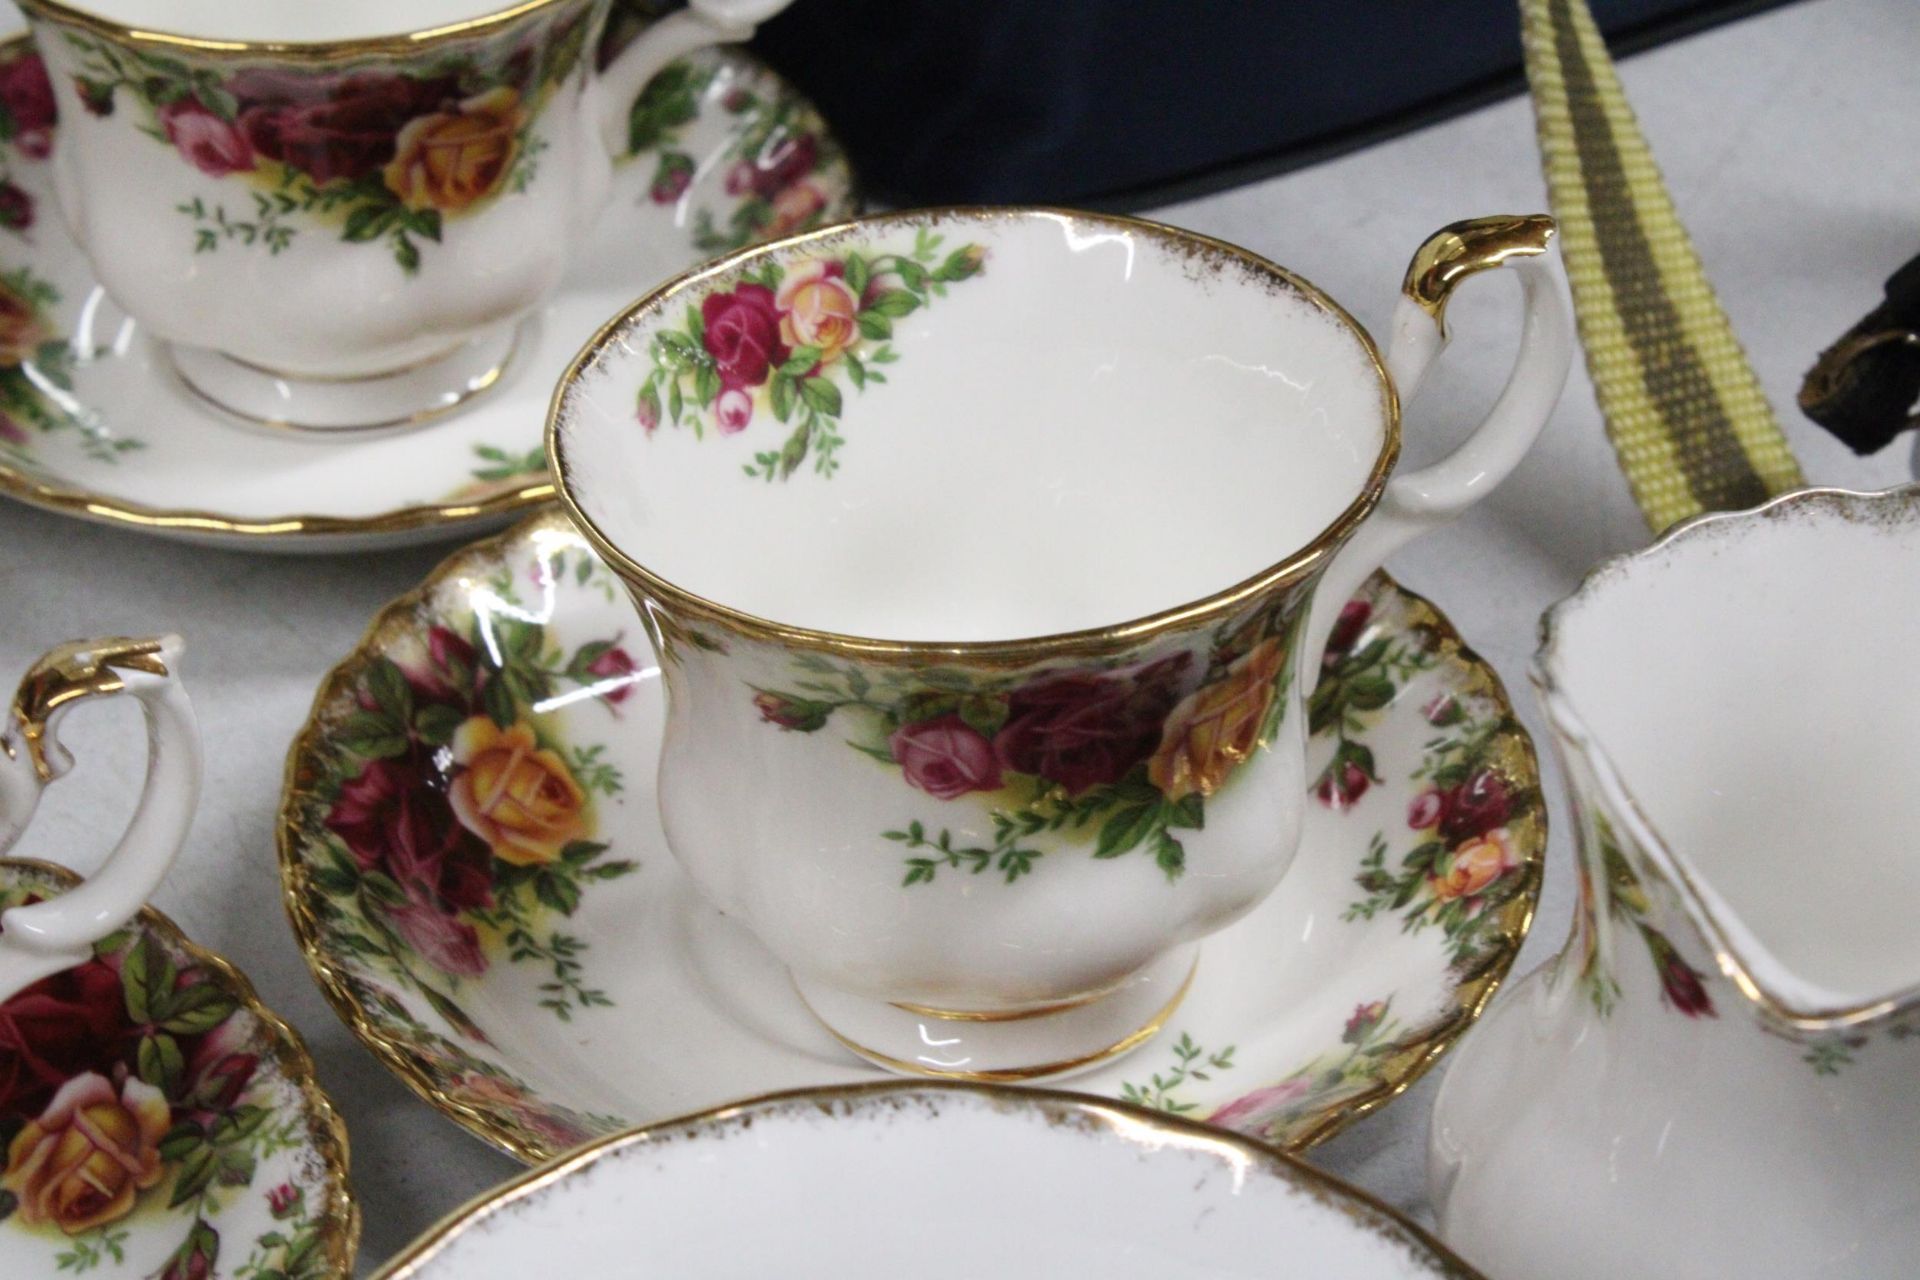 A QUANTITY OF ROYAL ALBERT 'OLD COUNTRY ROSES' TO INCLUDE CUPS, SAUCERS, A CREAM JUG AND SUGAR BOWL - Image 3 of 6